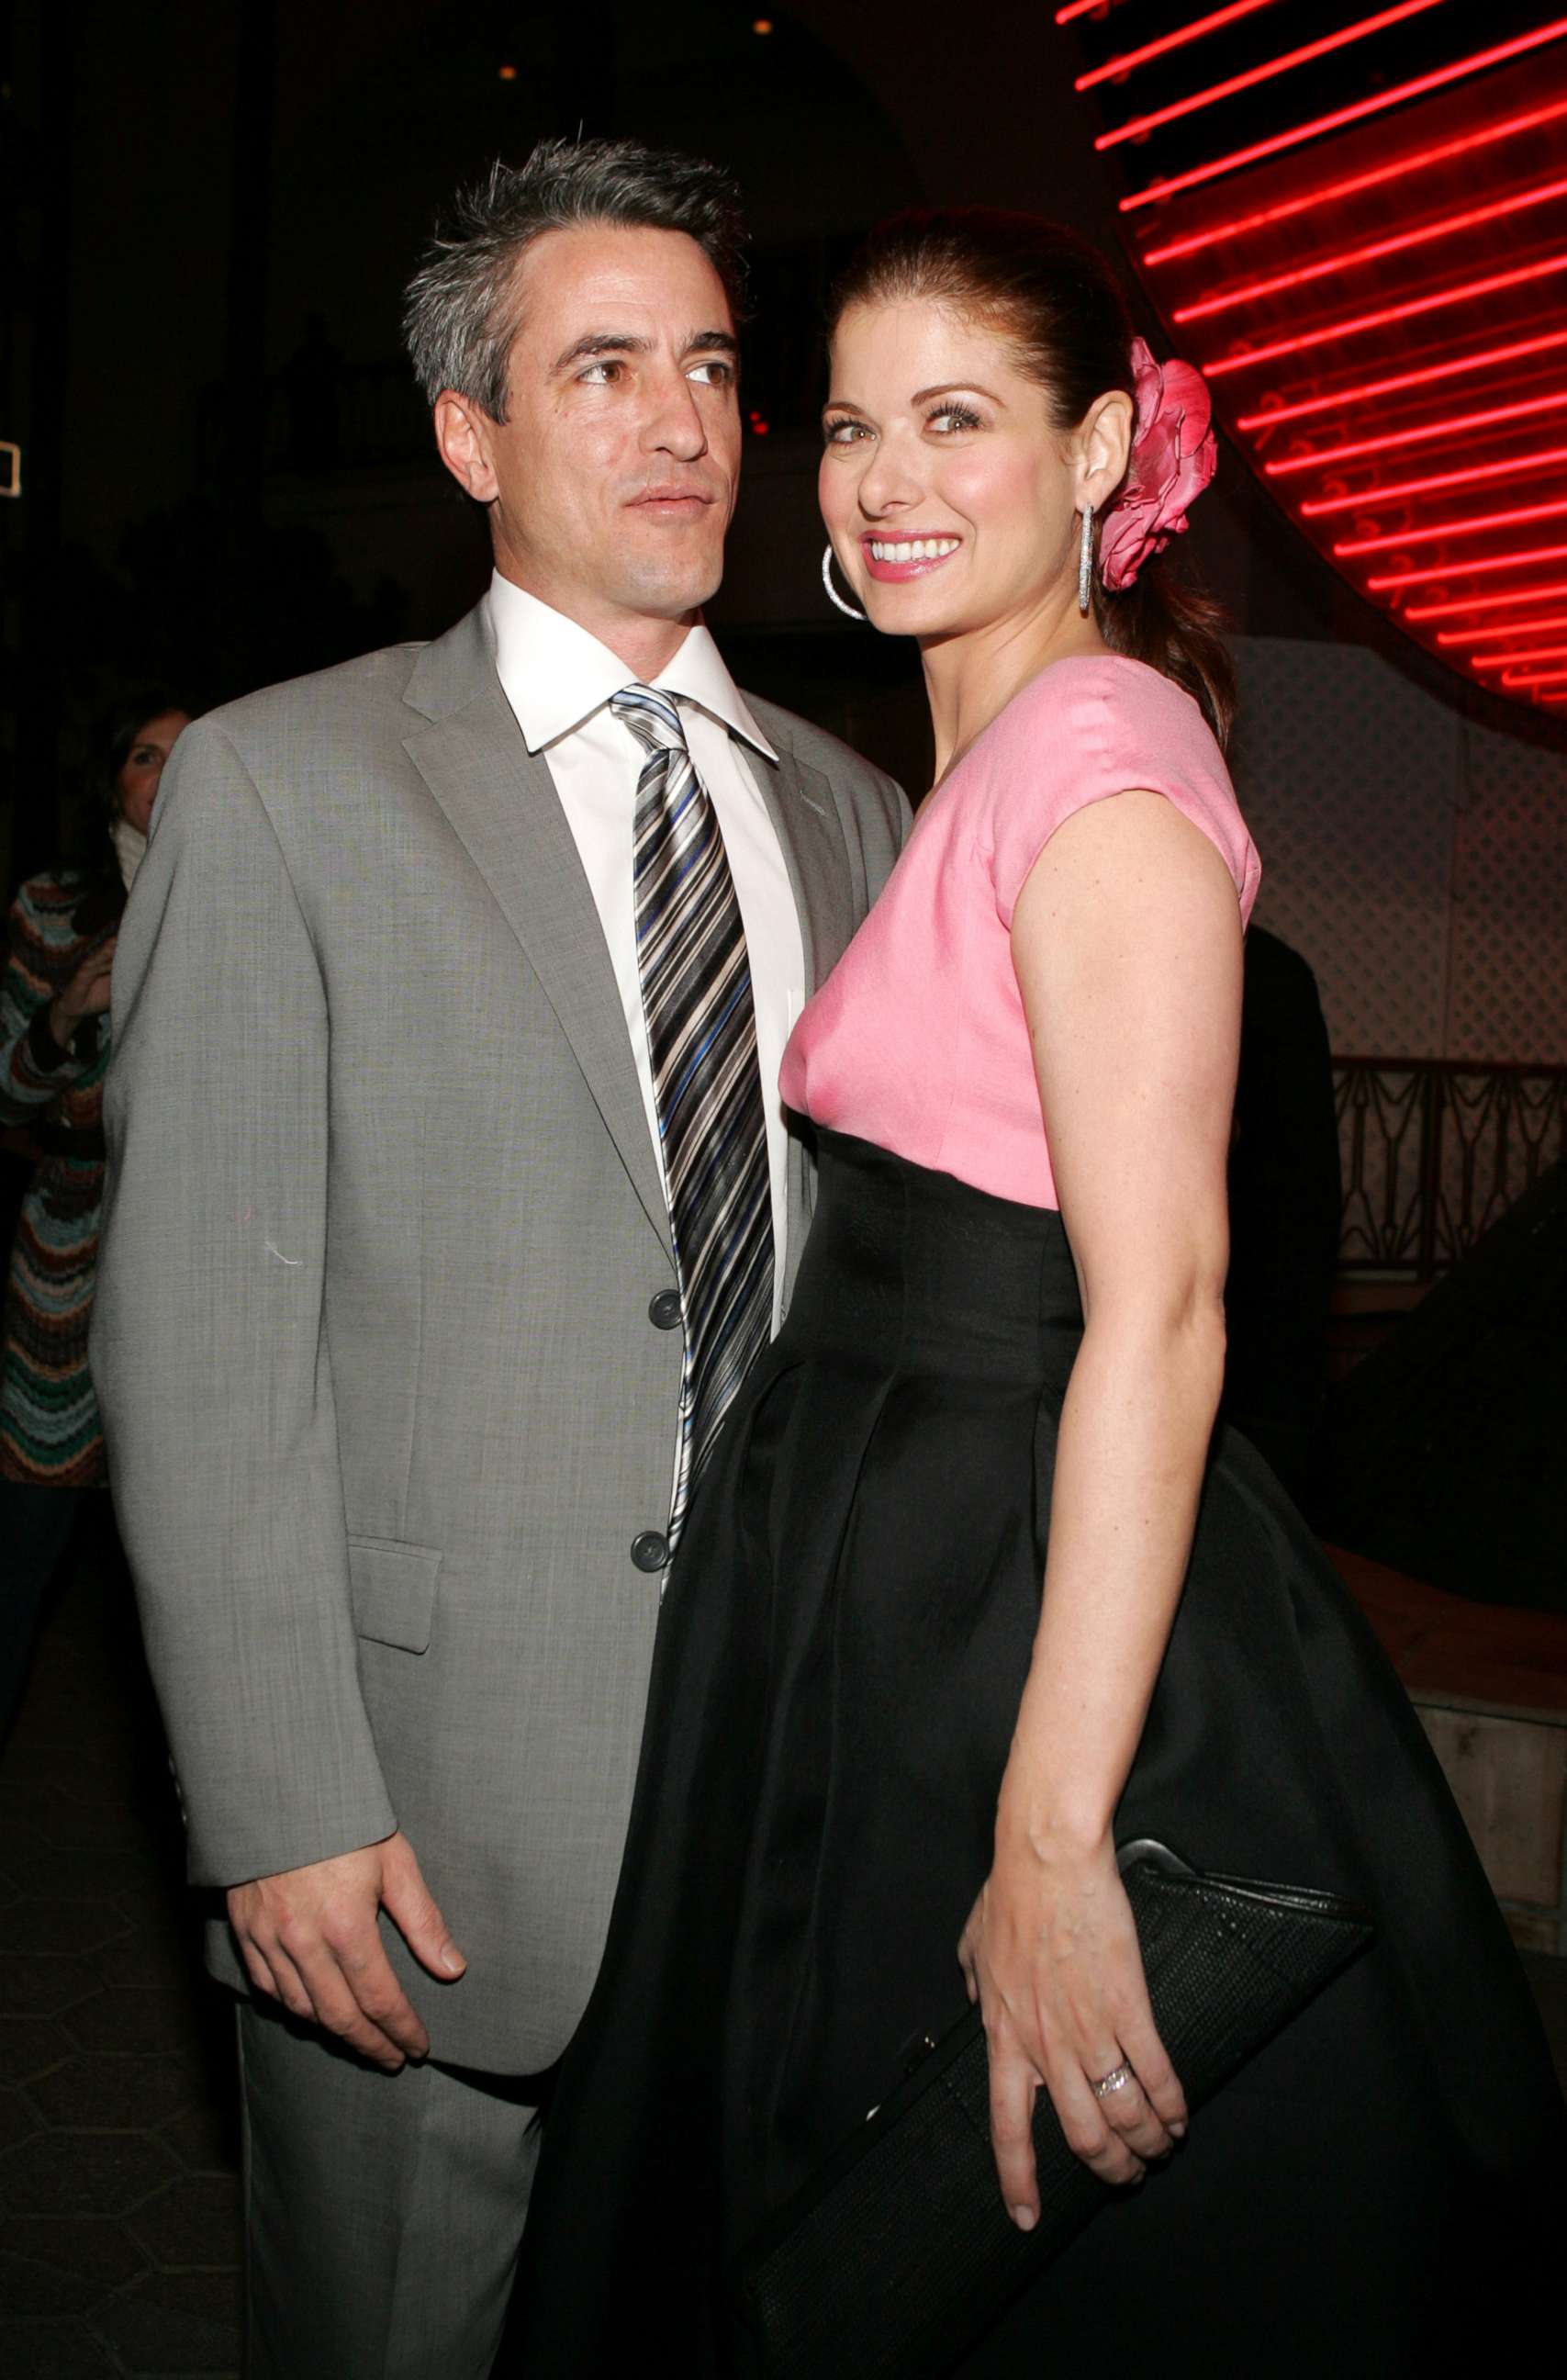 PHOTO: Actors Dermot Mulroney and Debra Messing attend the premiere of the film "The Wedding Date," Jan. 27, 2005, at Universal Studios in Los Angeles.